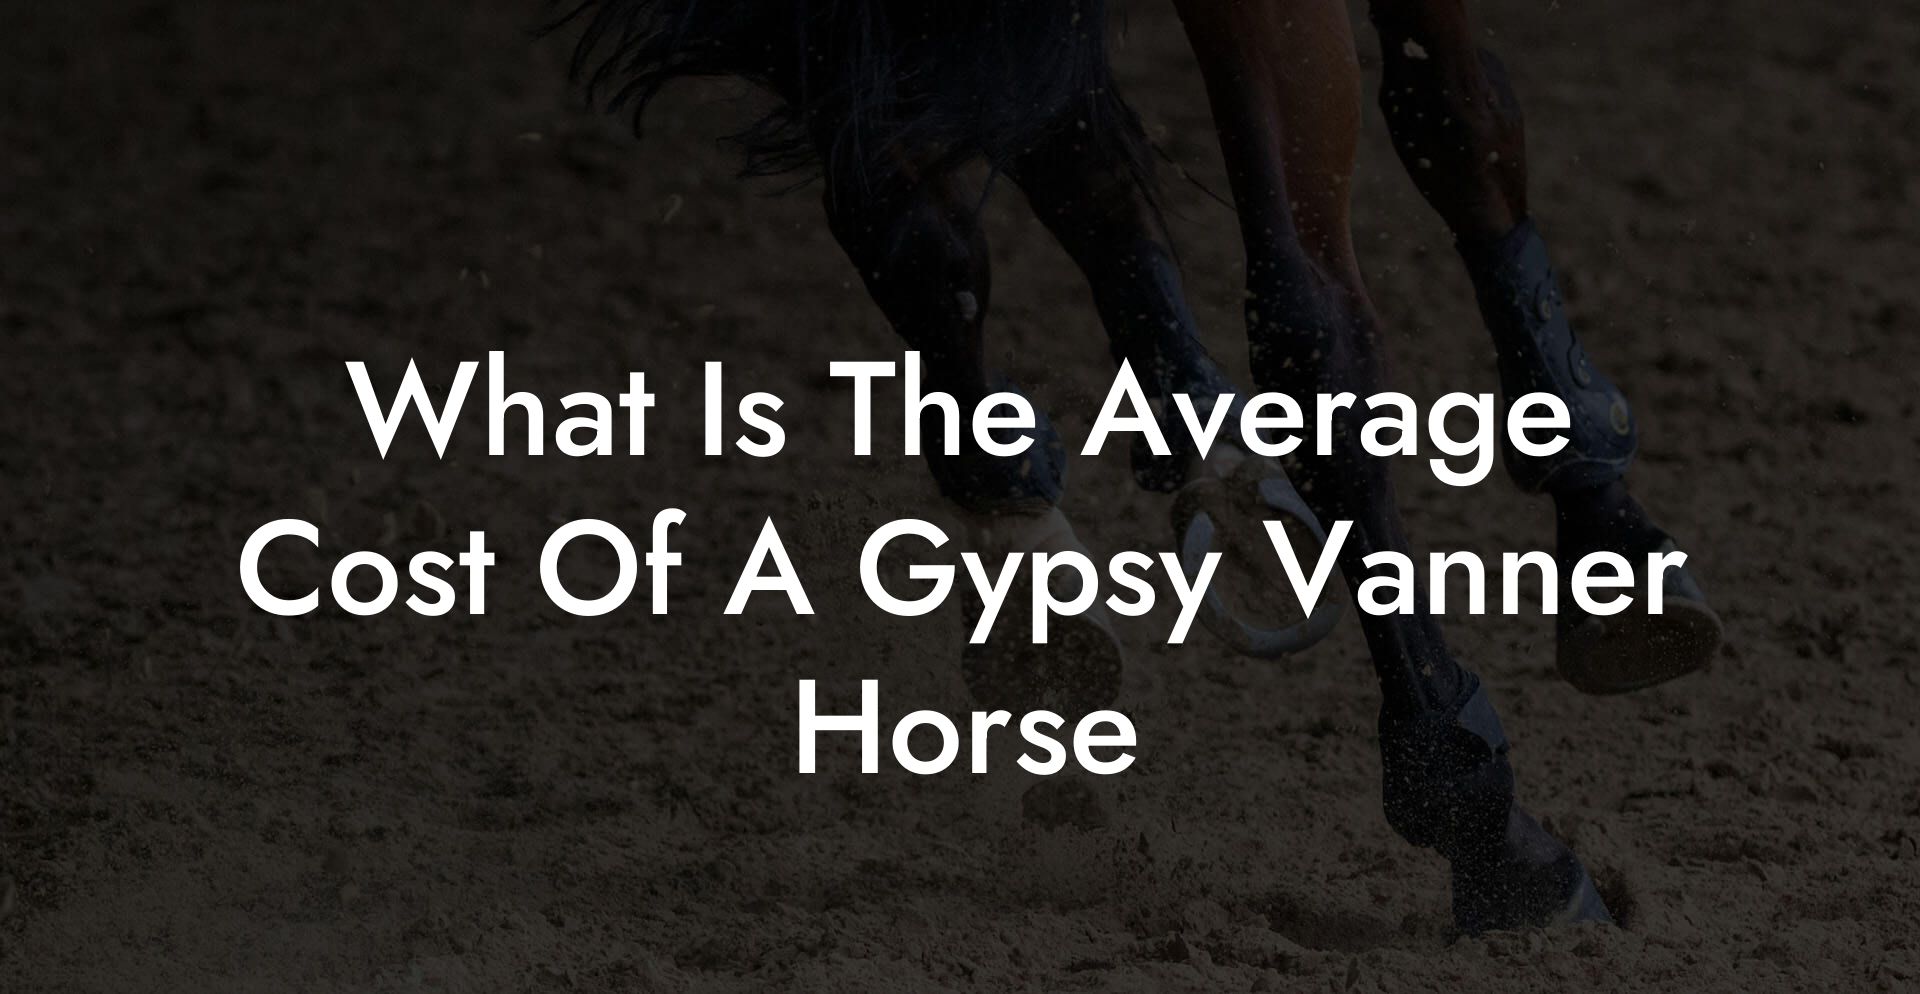 What Is The Average Cost Of A Gypsy Vanner Horse